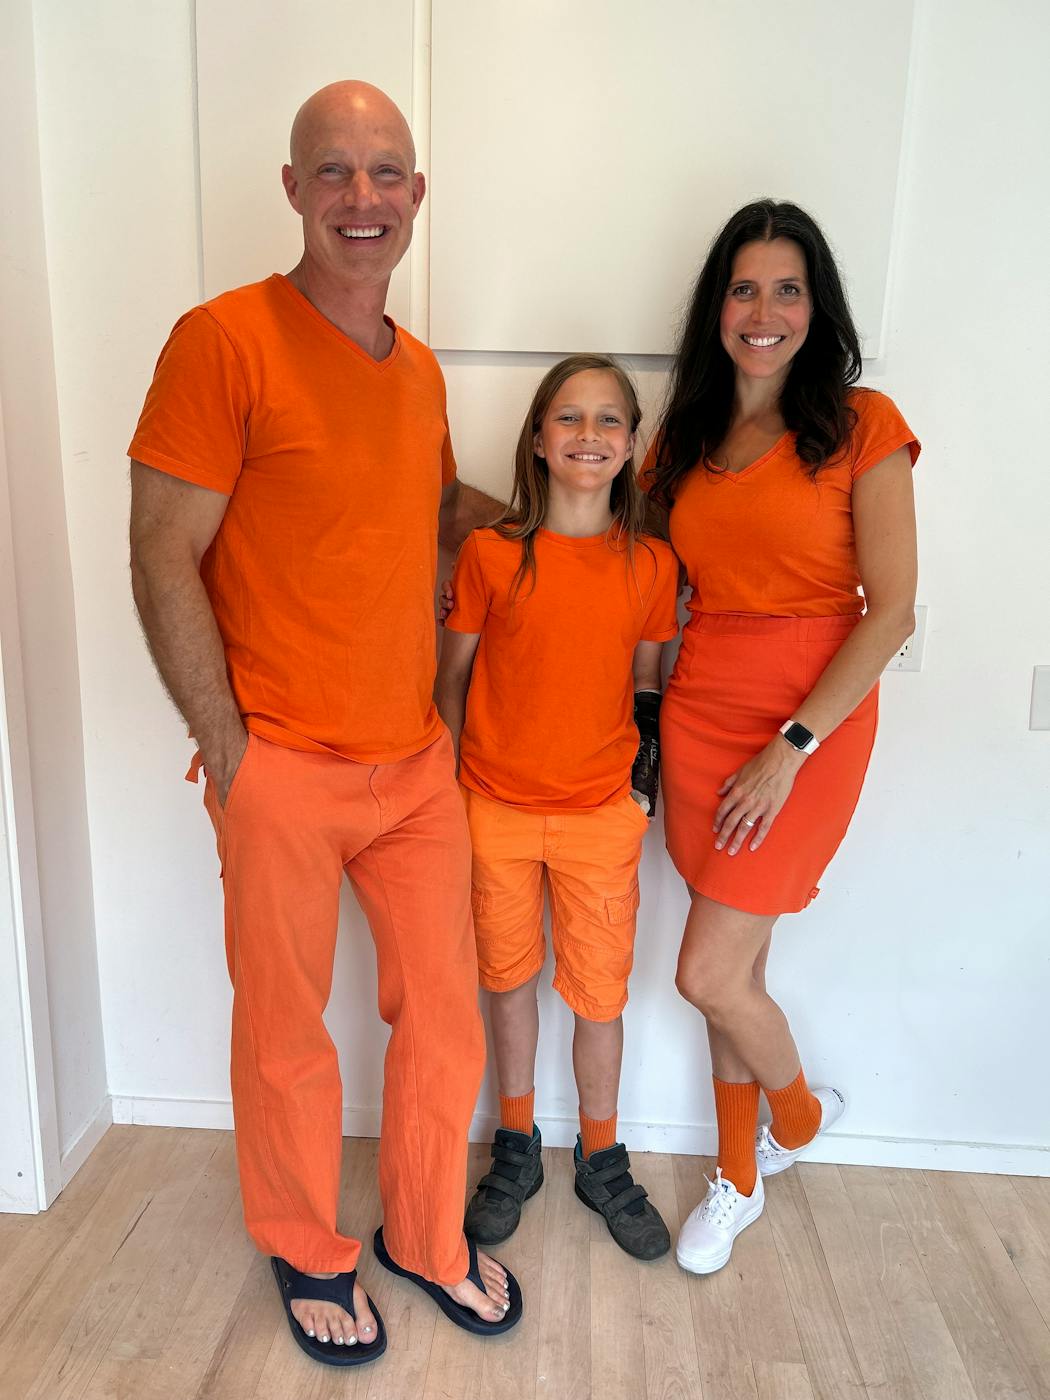 Darren, Harold and Claire DeBerg have been known to match in bold colors, in part to promote the family’s Monochrome clothing line. A recent visit to their home apparently was on Orange Day.